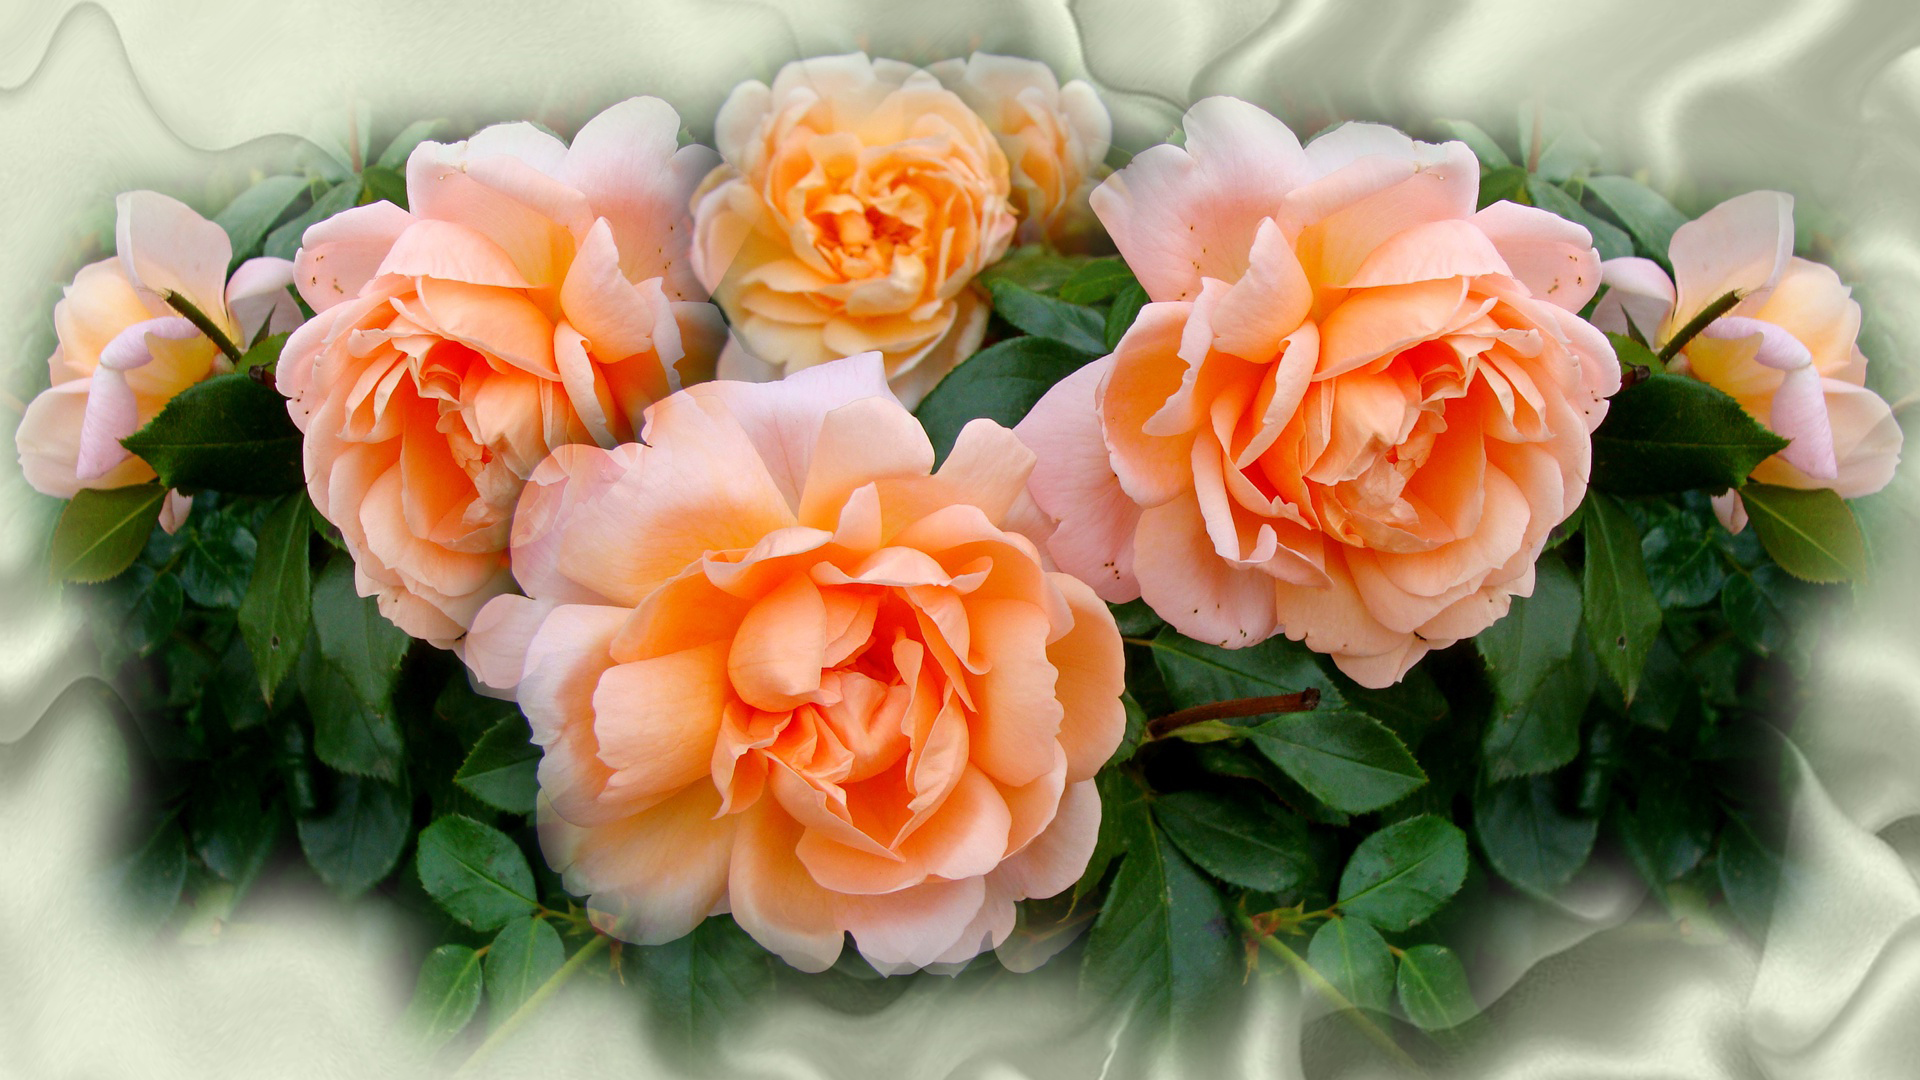 Peach Rose With Green Leaves On White Satin Texture HD